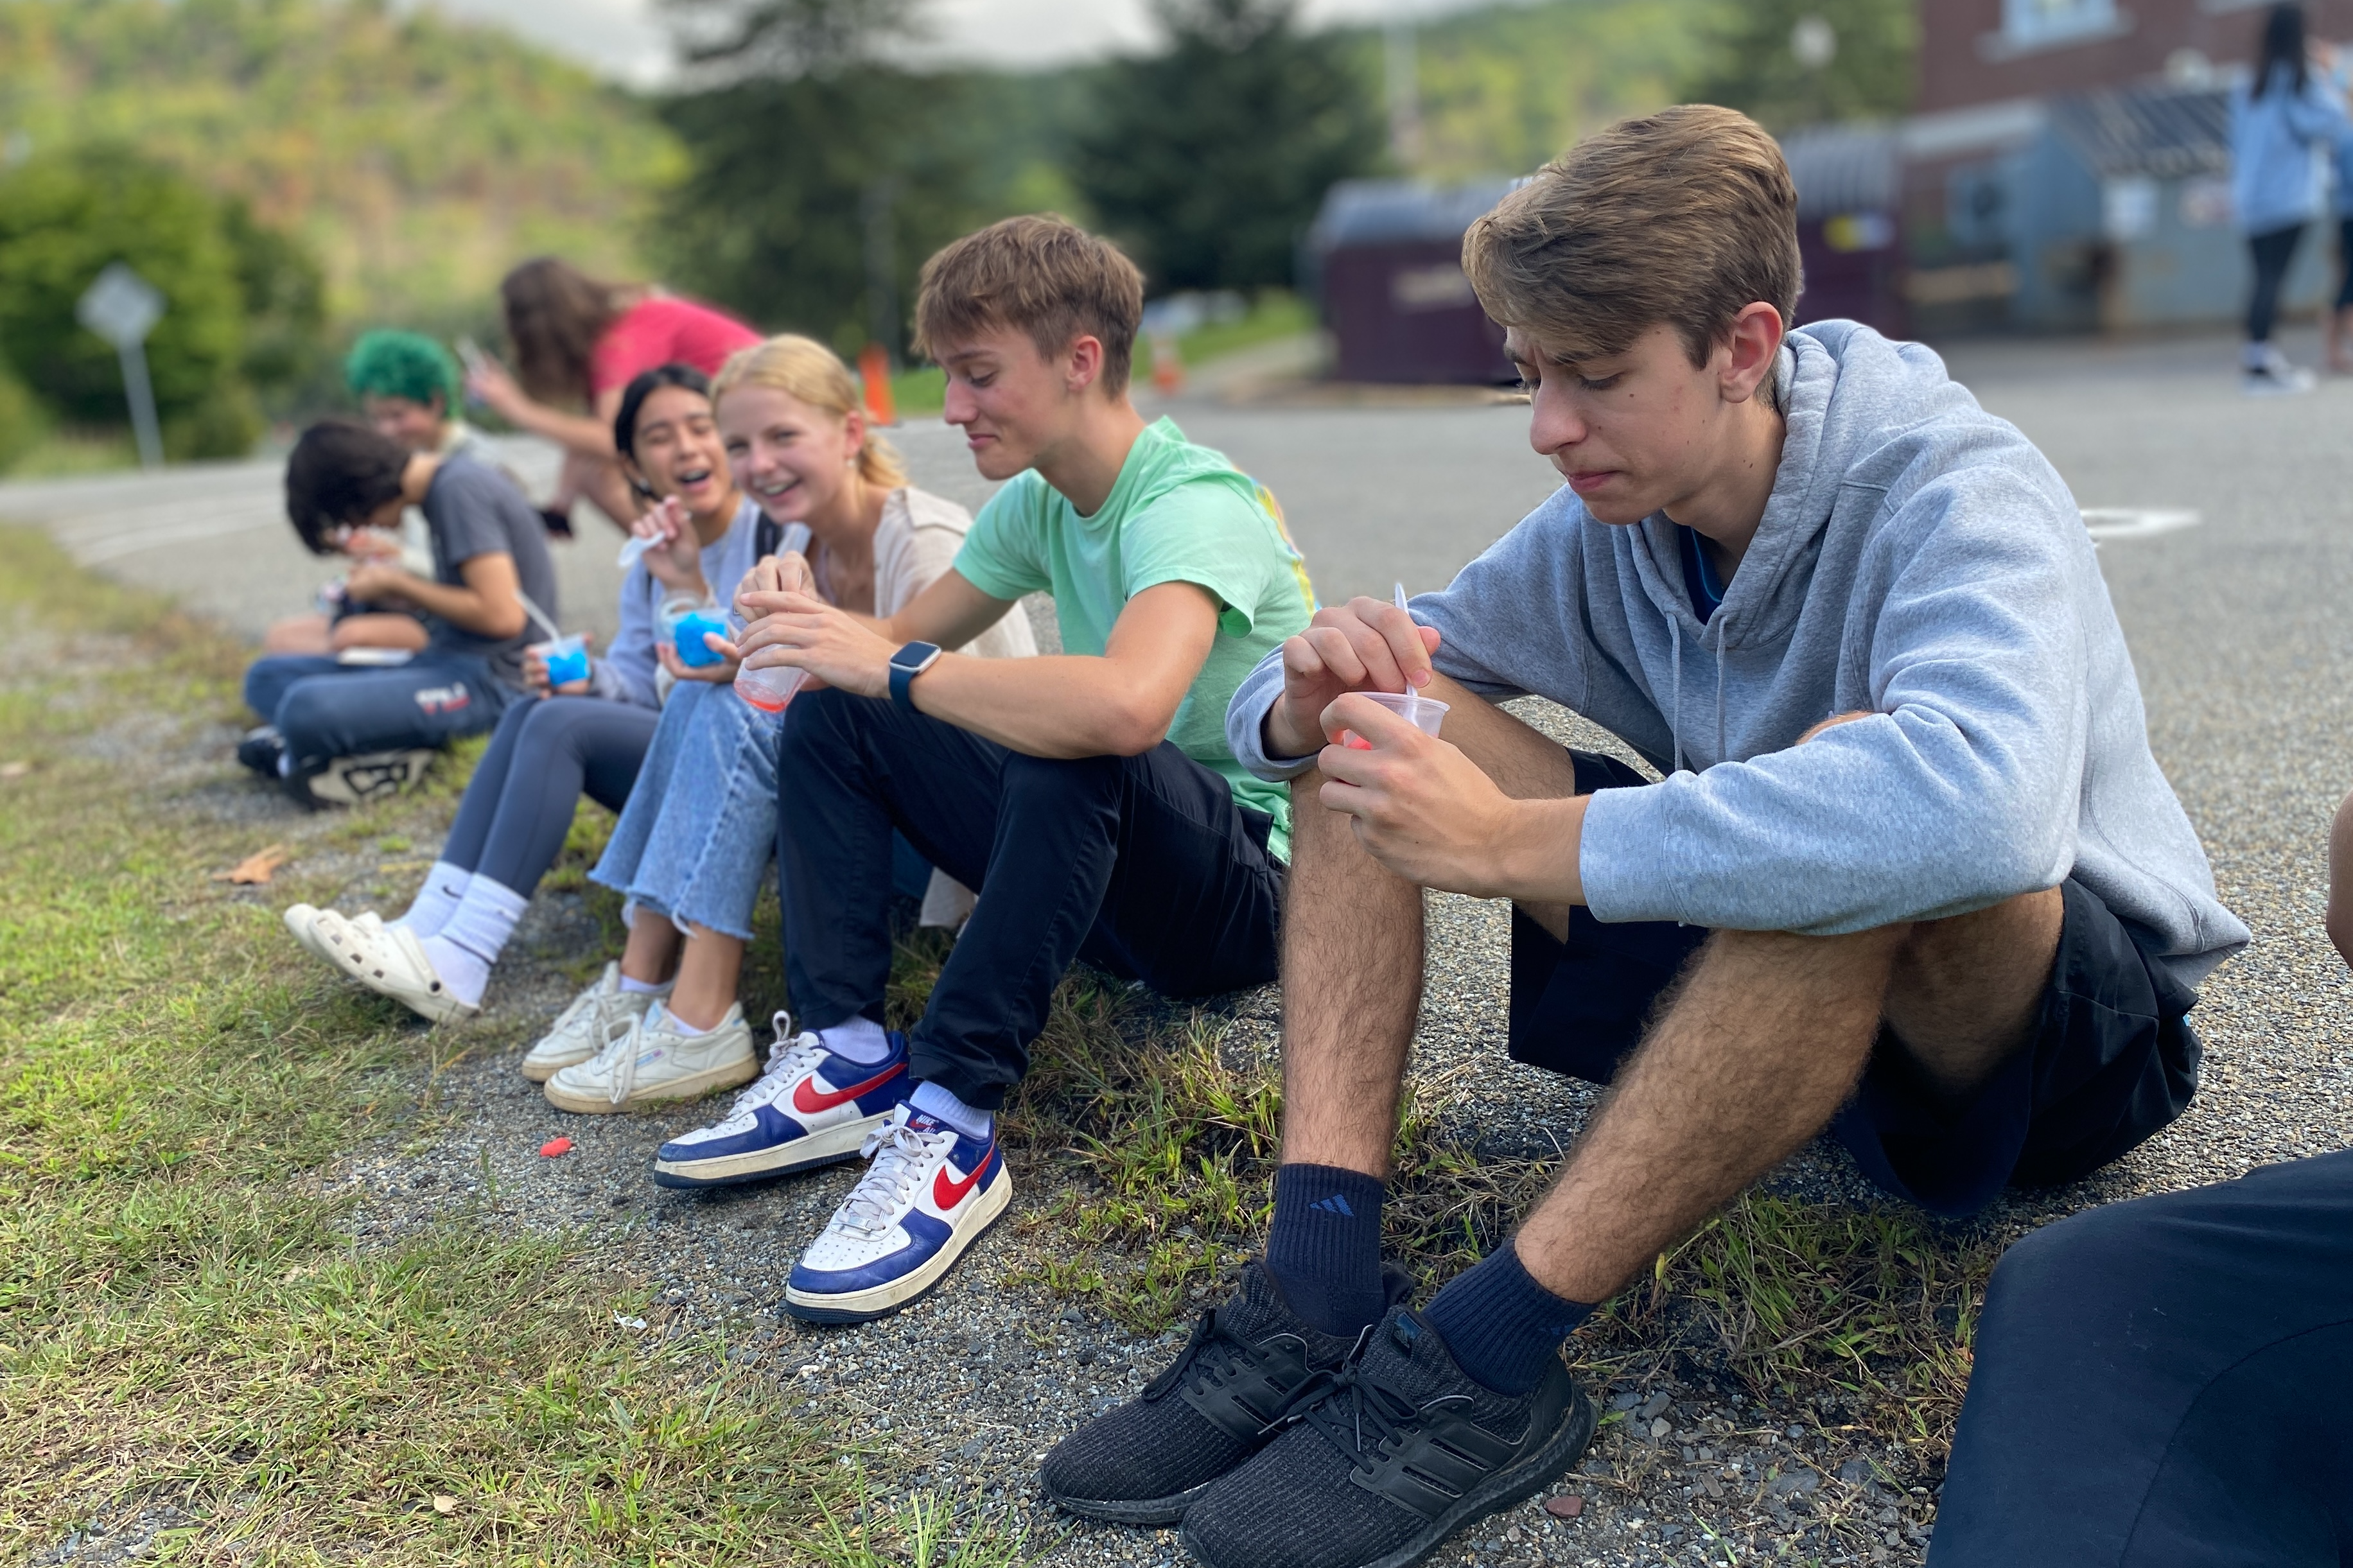 High School Students sitting on grass eating italian ices